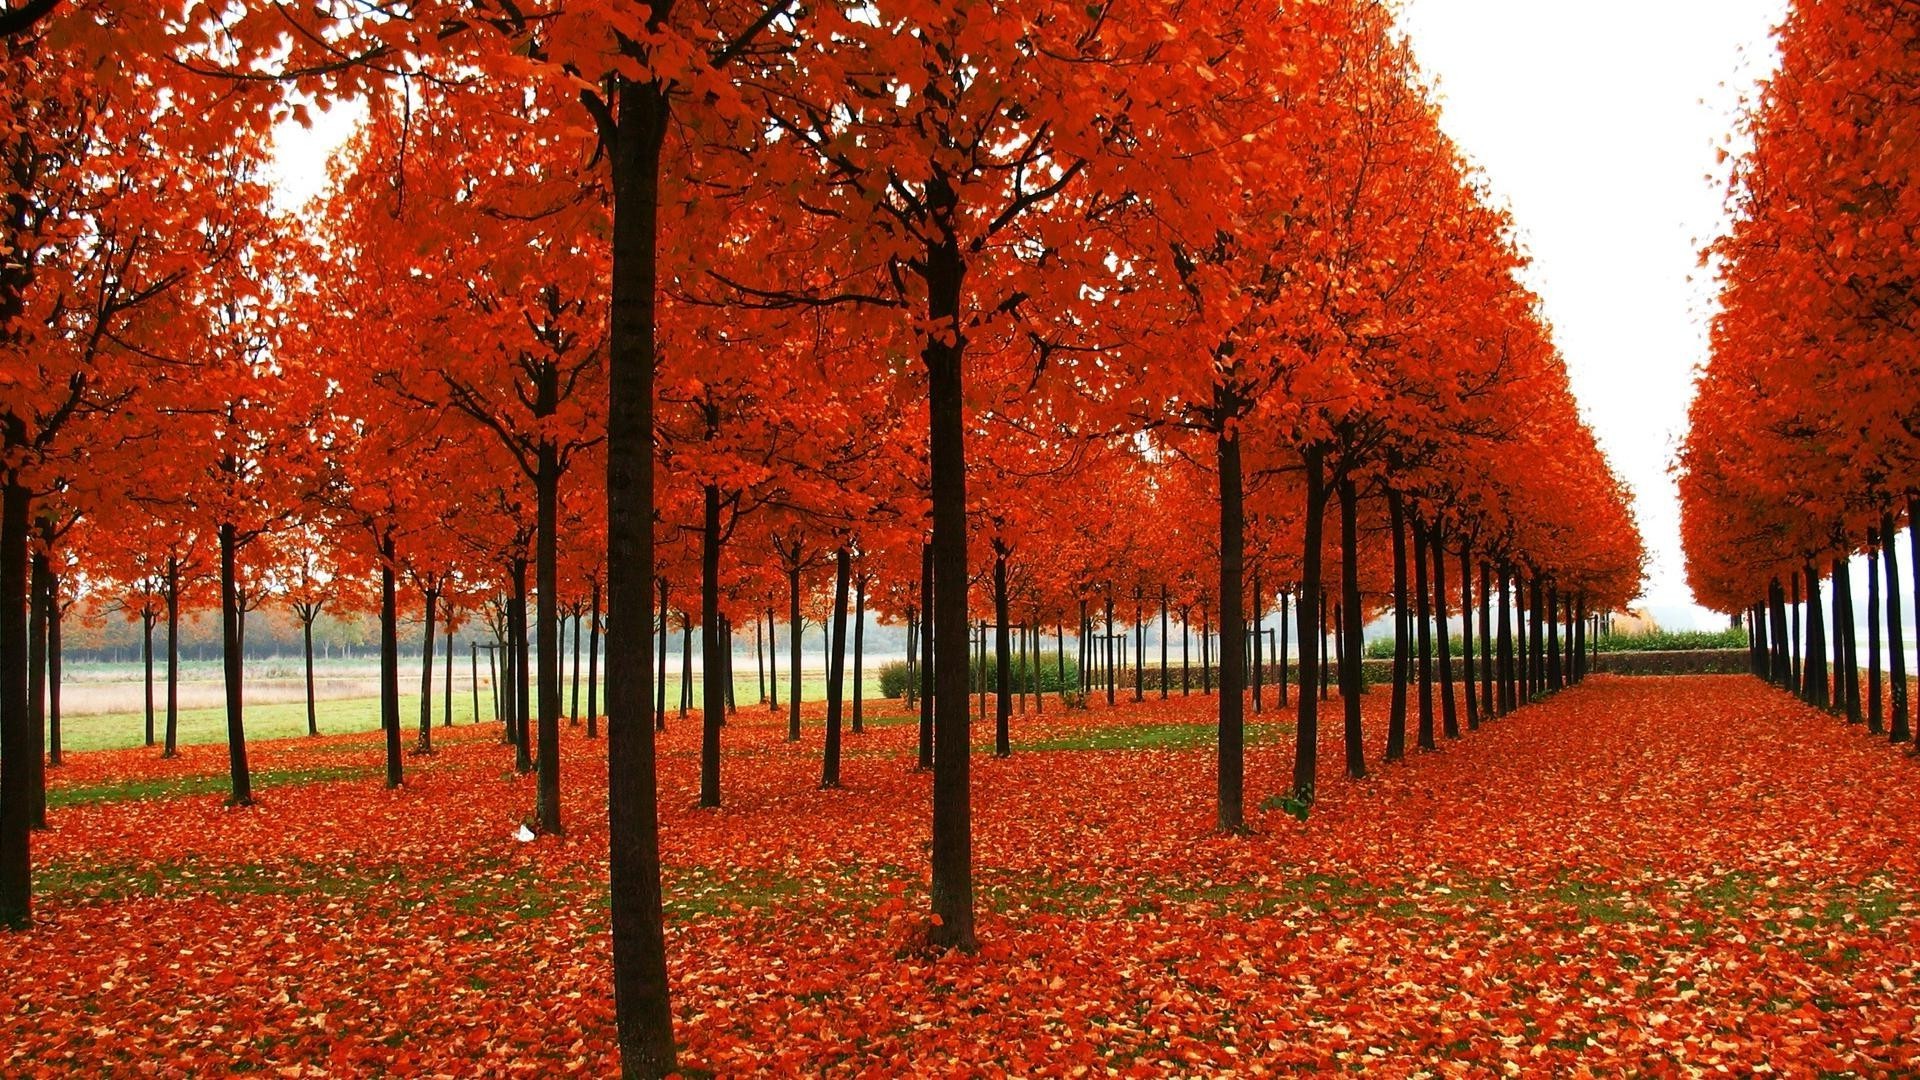 autumn leaf tree fall landscape park season maple bright nature outdoors countryside wood color rural scenic